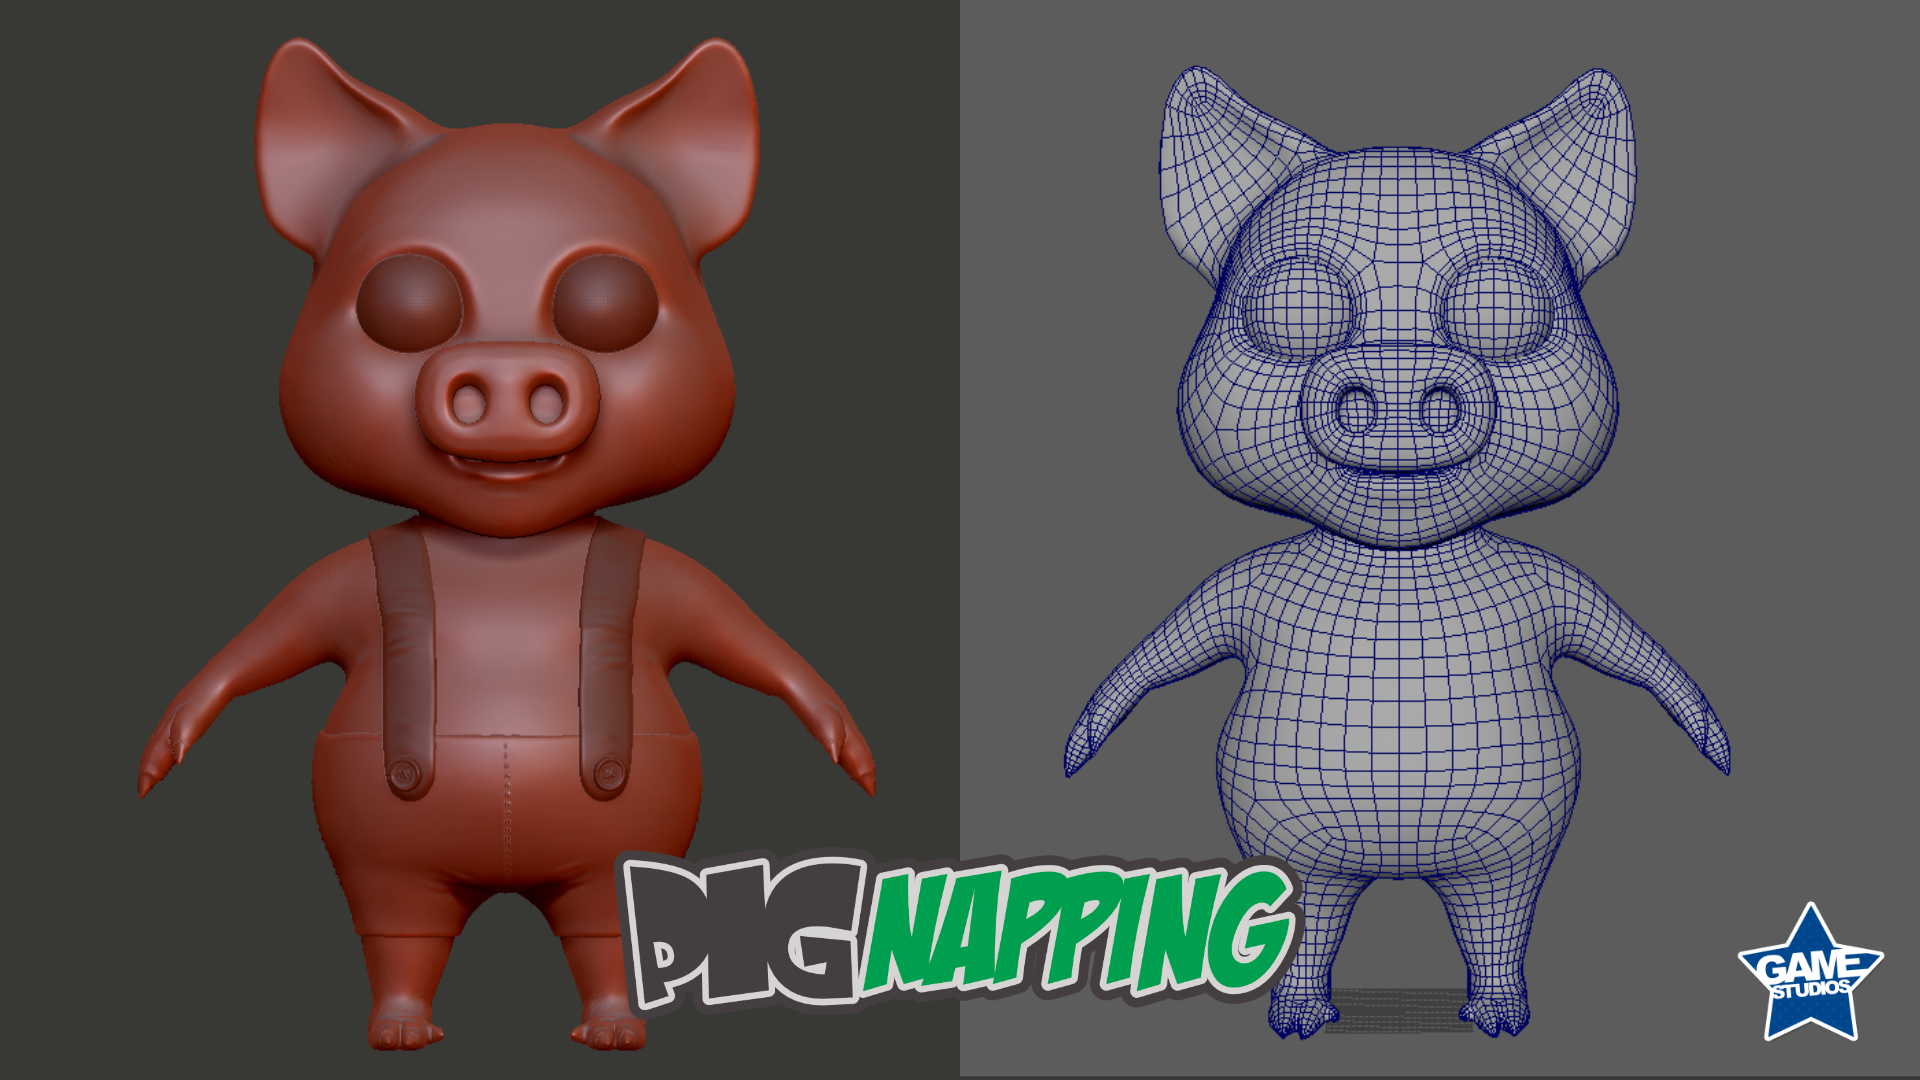 3d Wireframe - Pig 3d Character - PigNapping